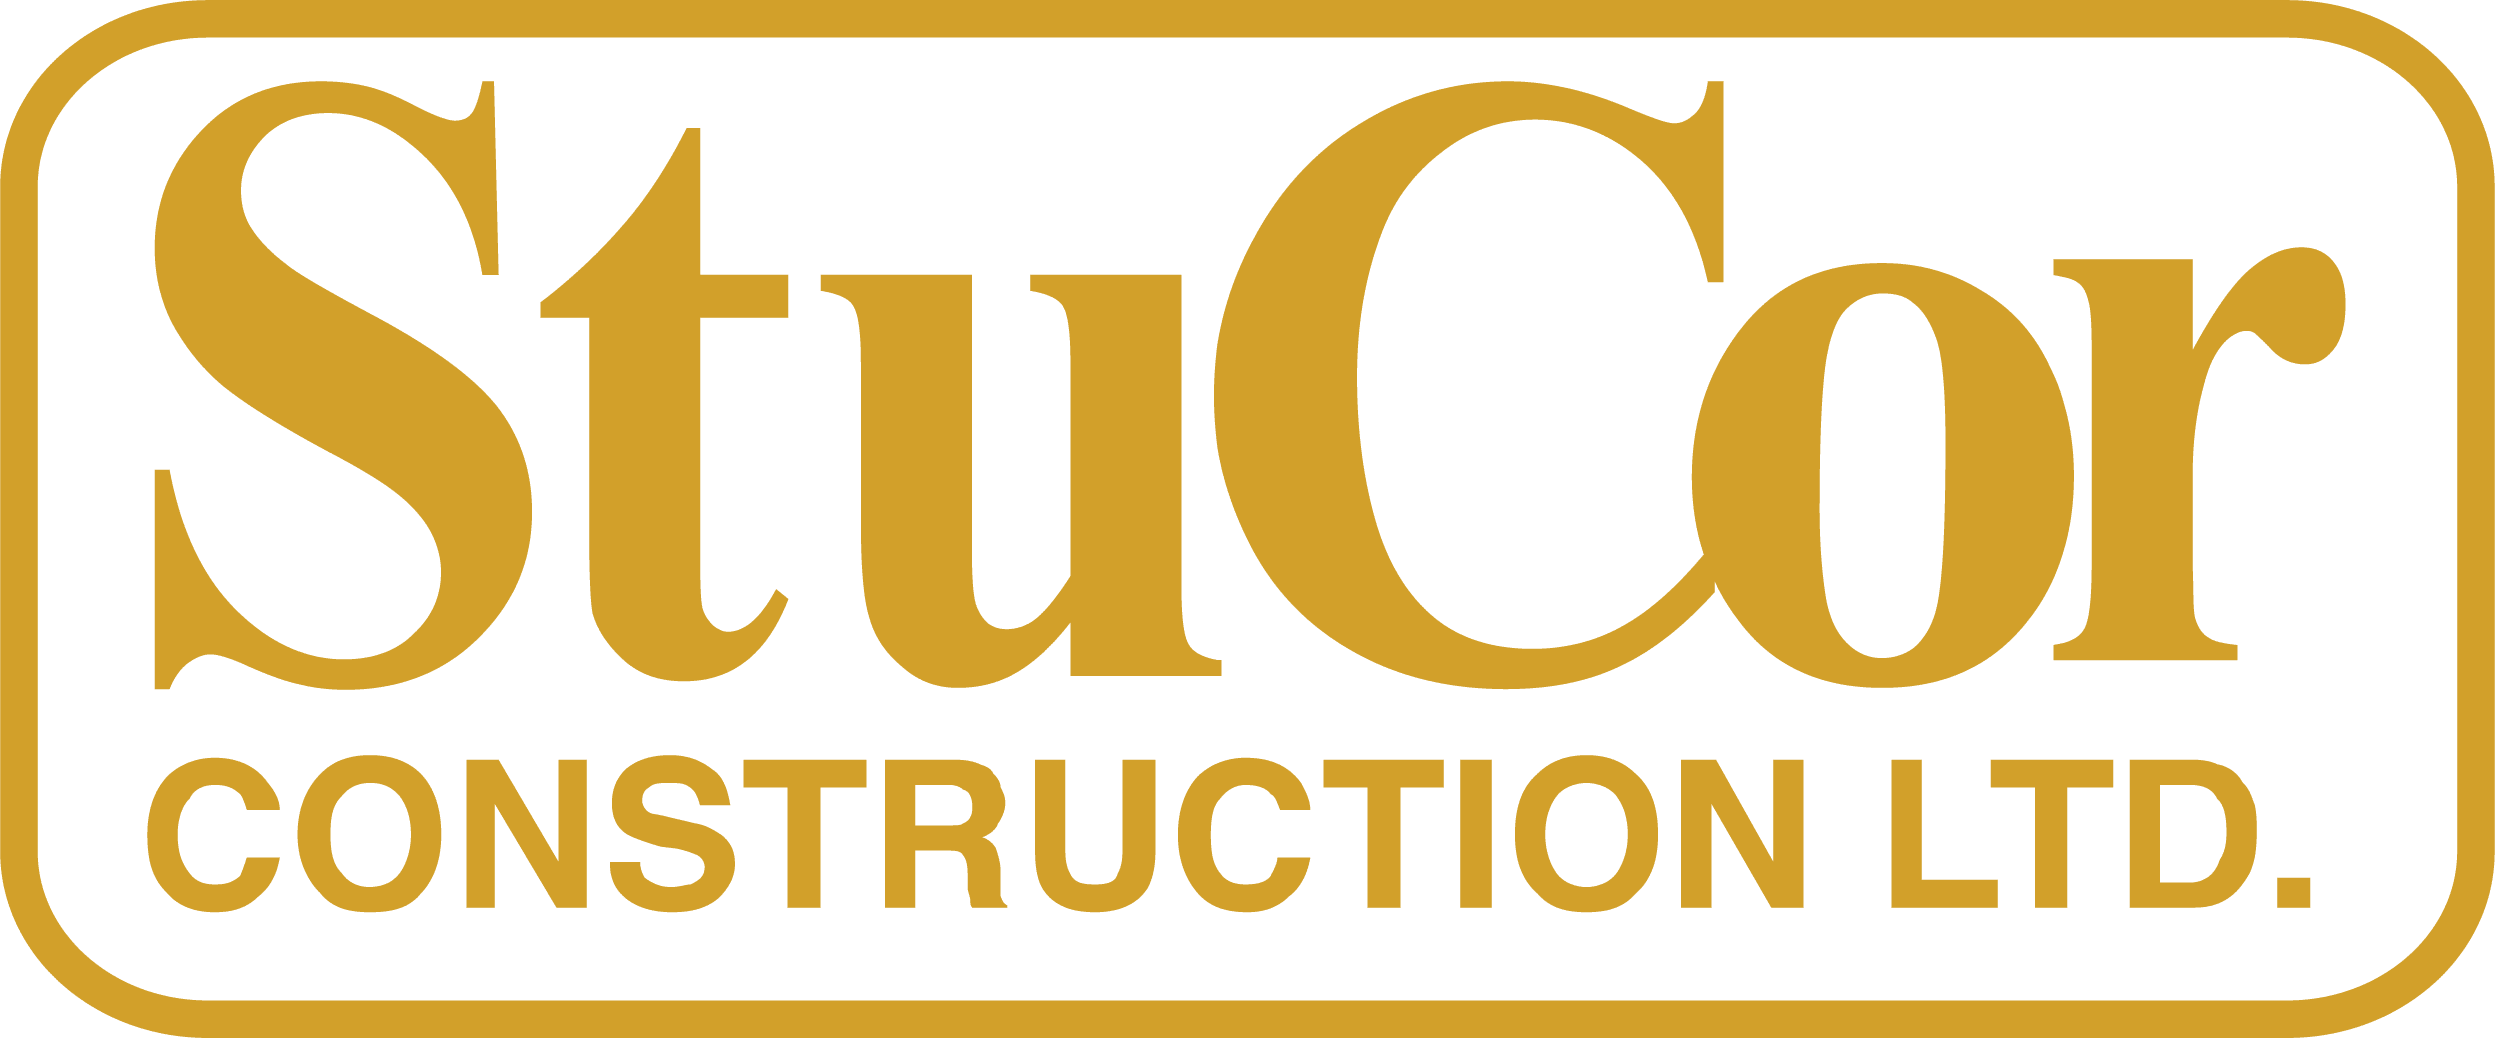 A green and yellow logo for tuco construction.